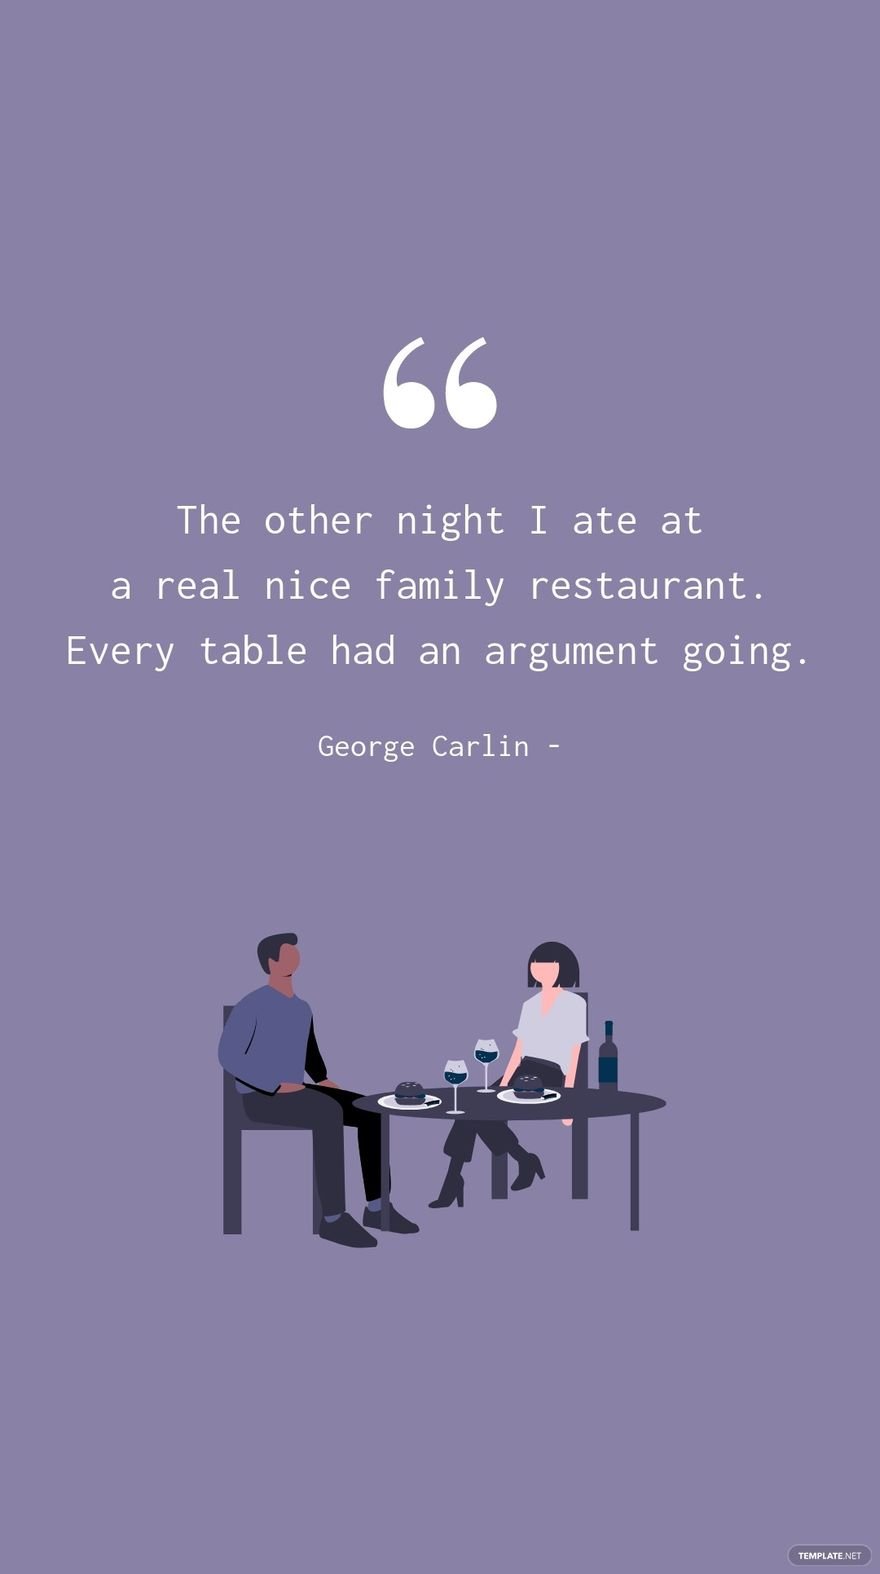 George Carlin - The other night I ate at a real nice family restaurant. Every table had an argument going. in JPG